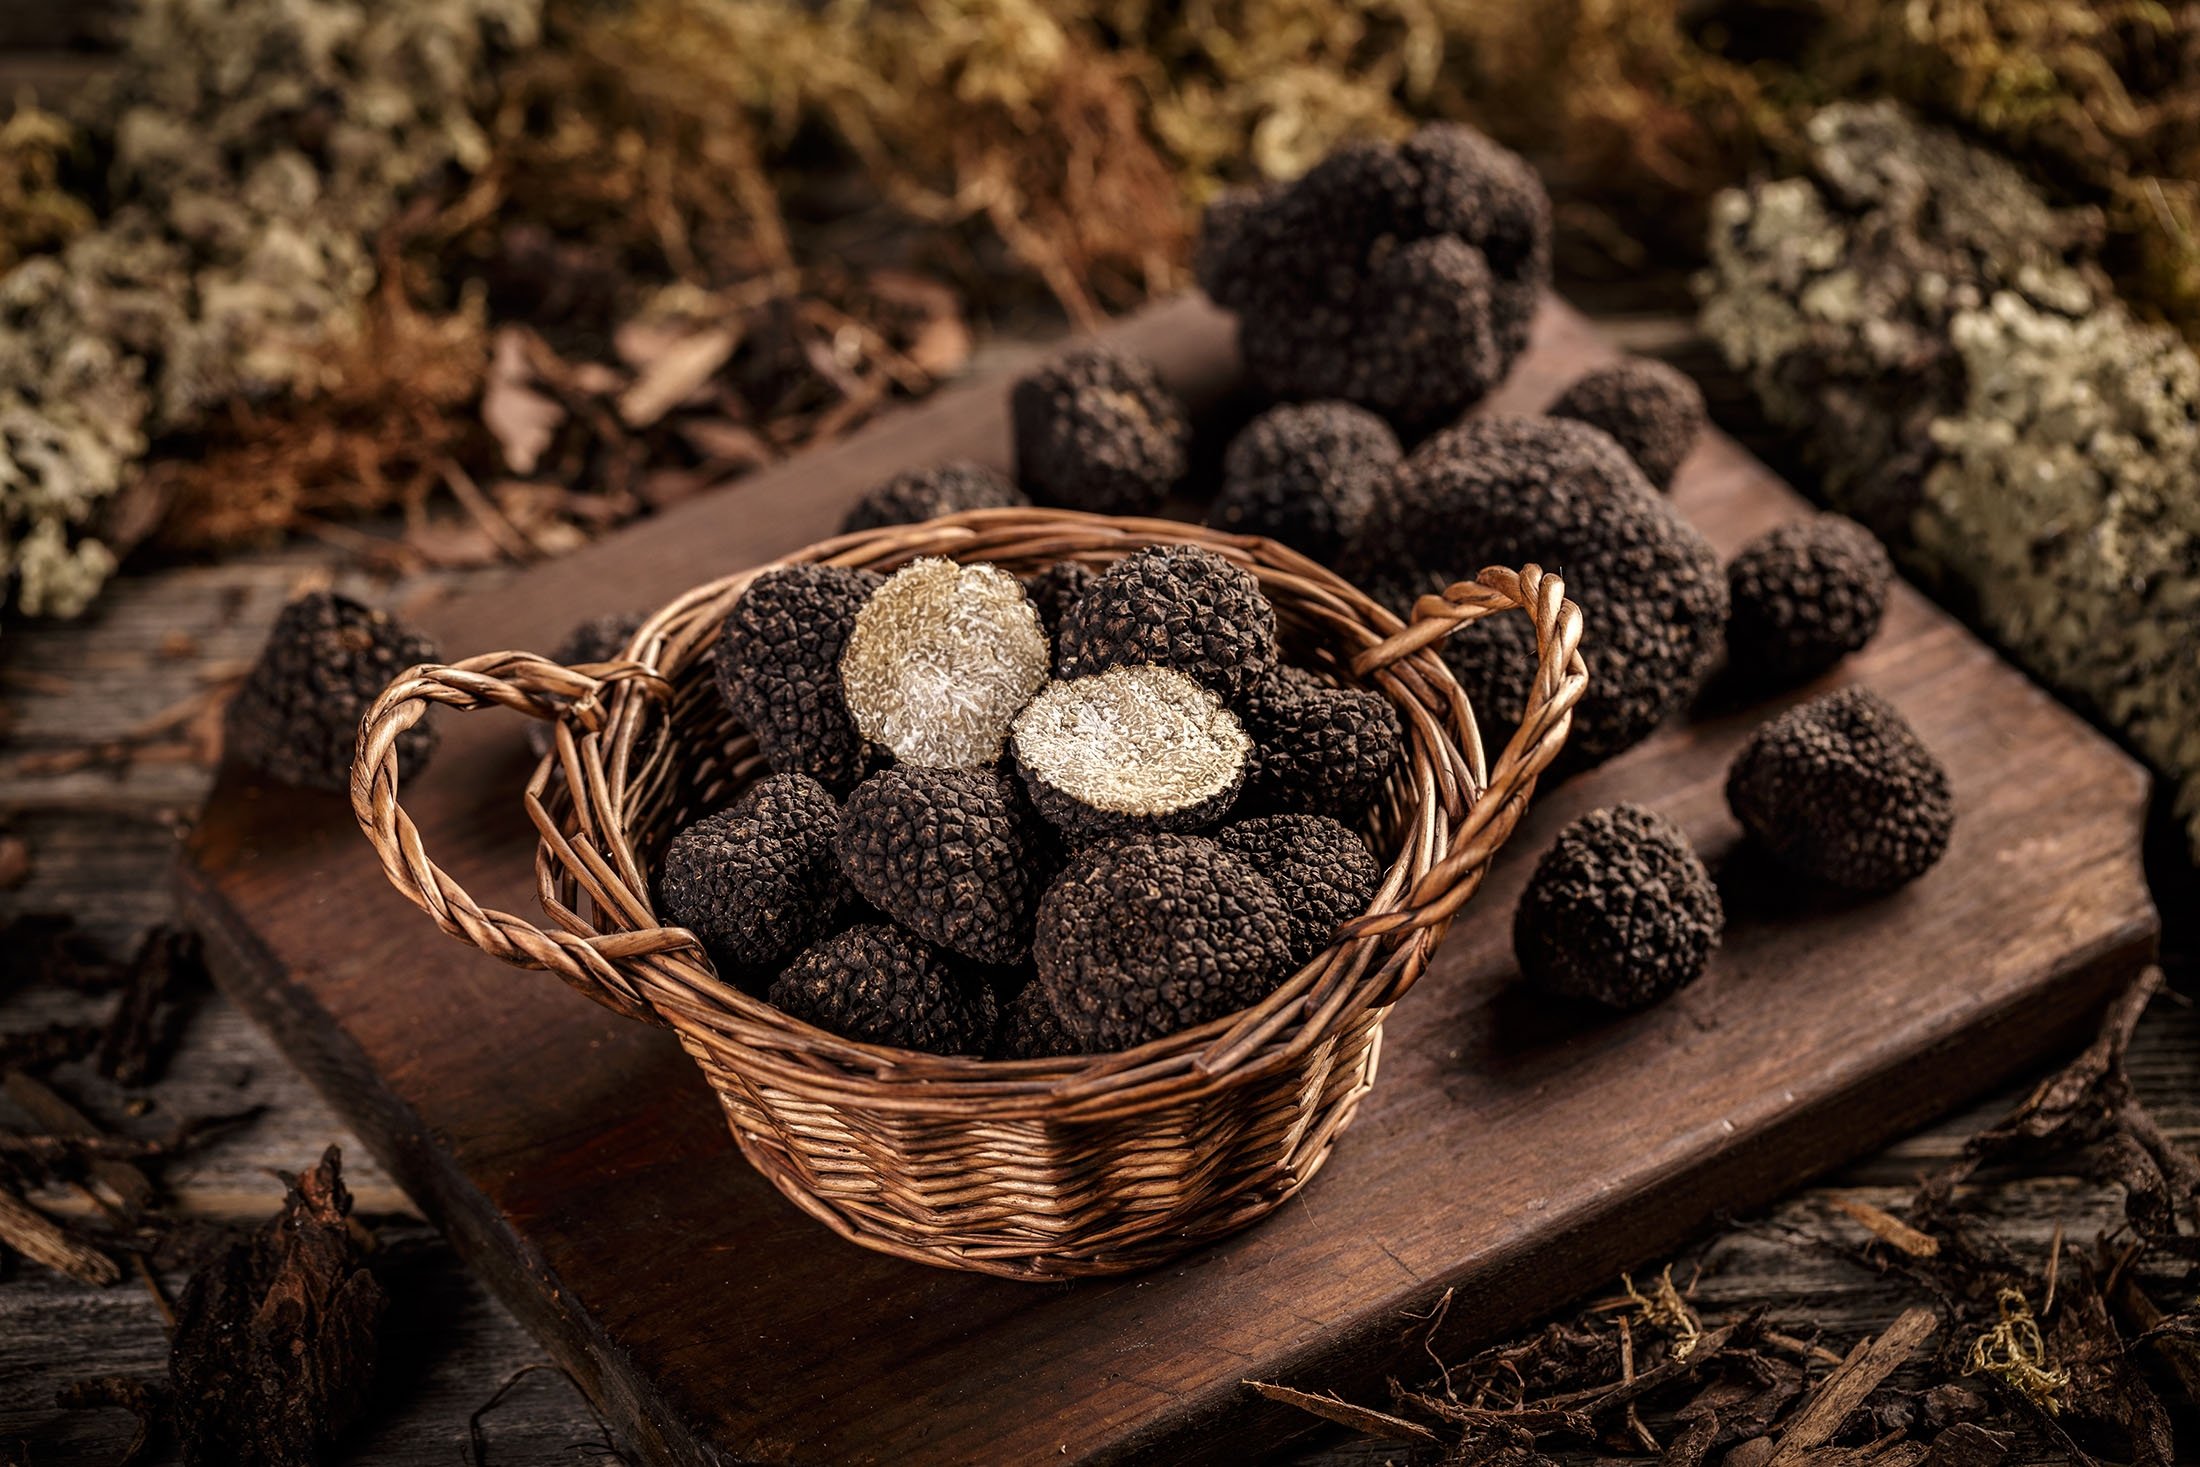 Black truffles are used in many dishes, including sauces or seasoning, as well as in specialty butter. (Shutterstock Photo)